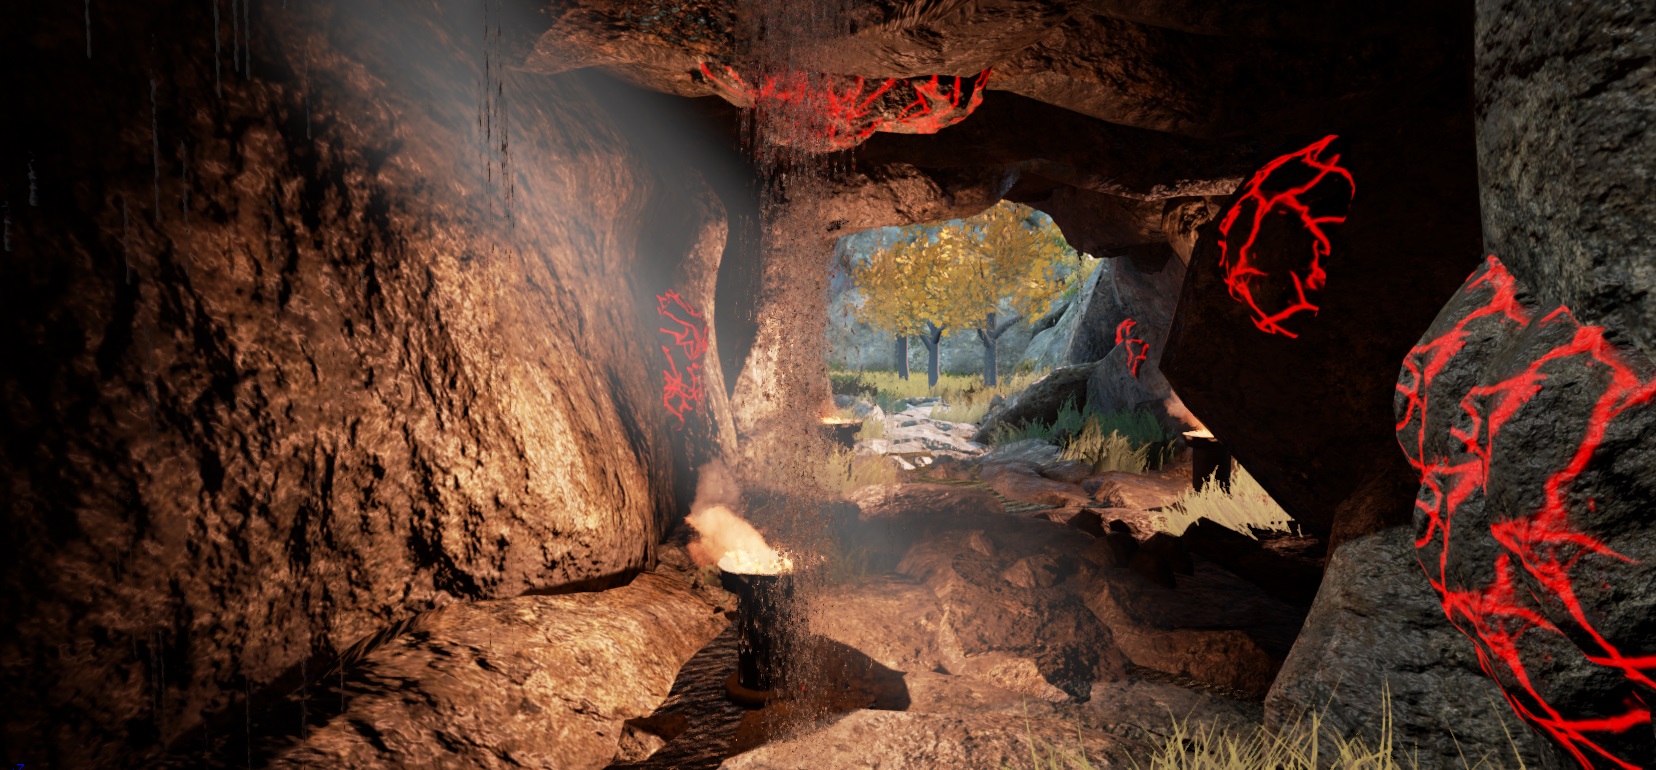 4cave_scene_wip_1_by_captainapoc-d899ctc.jpg